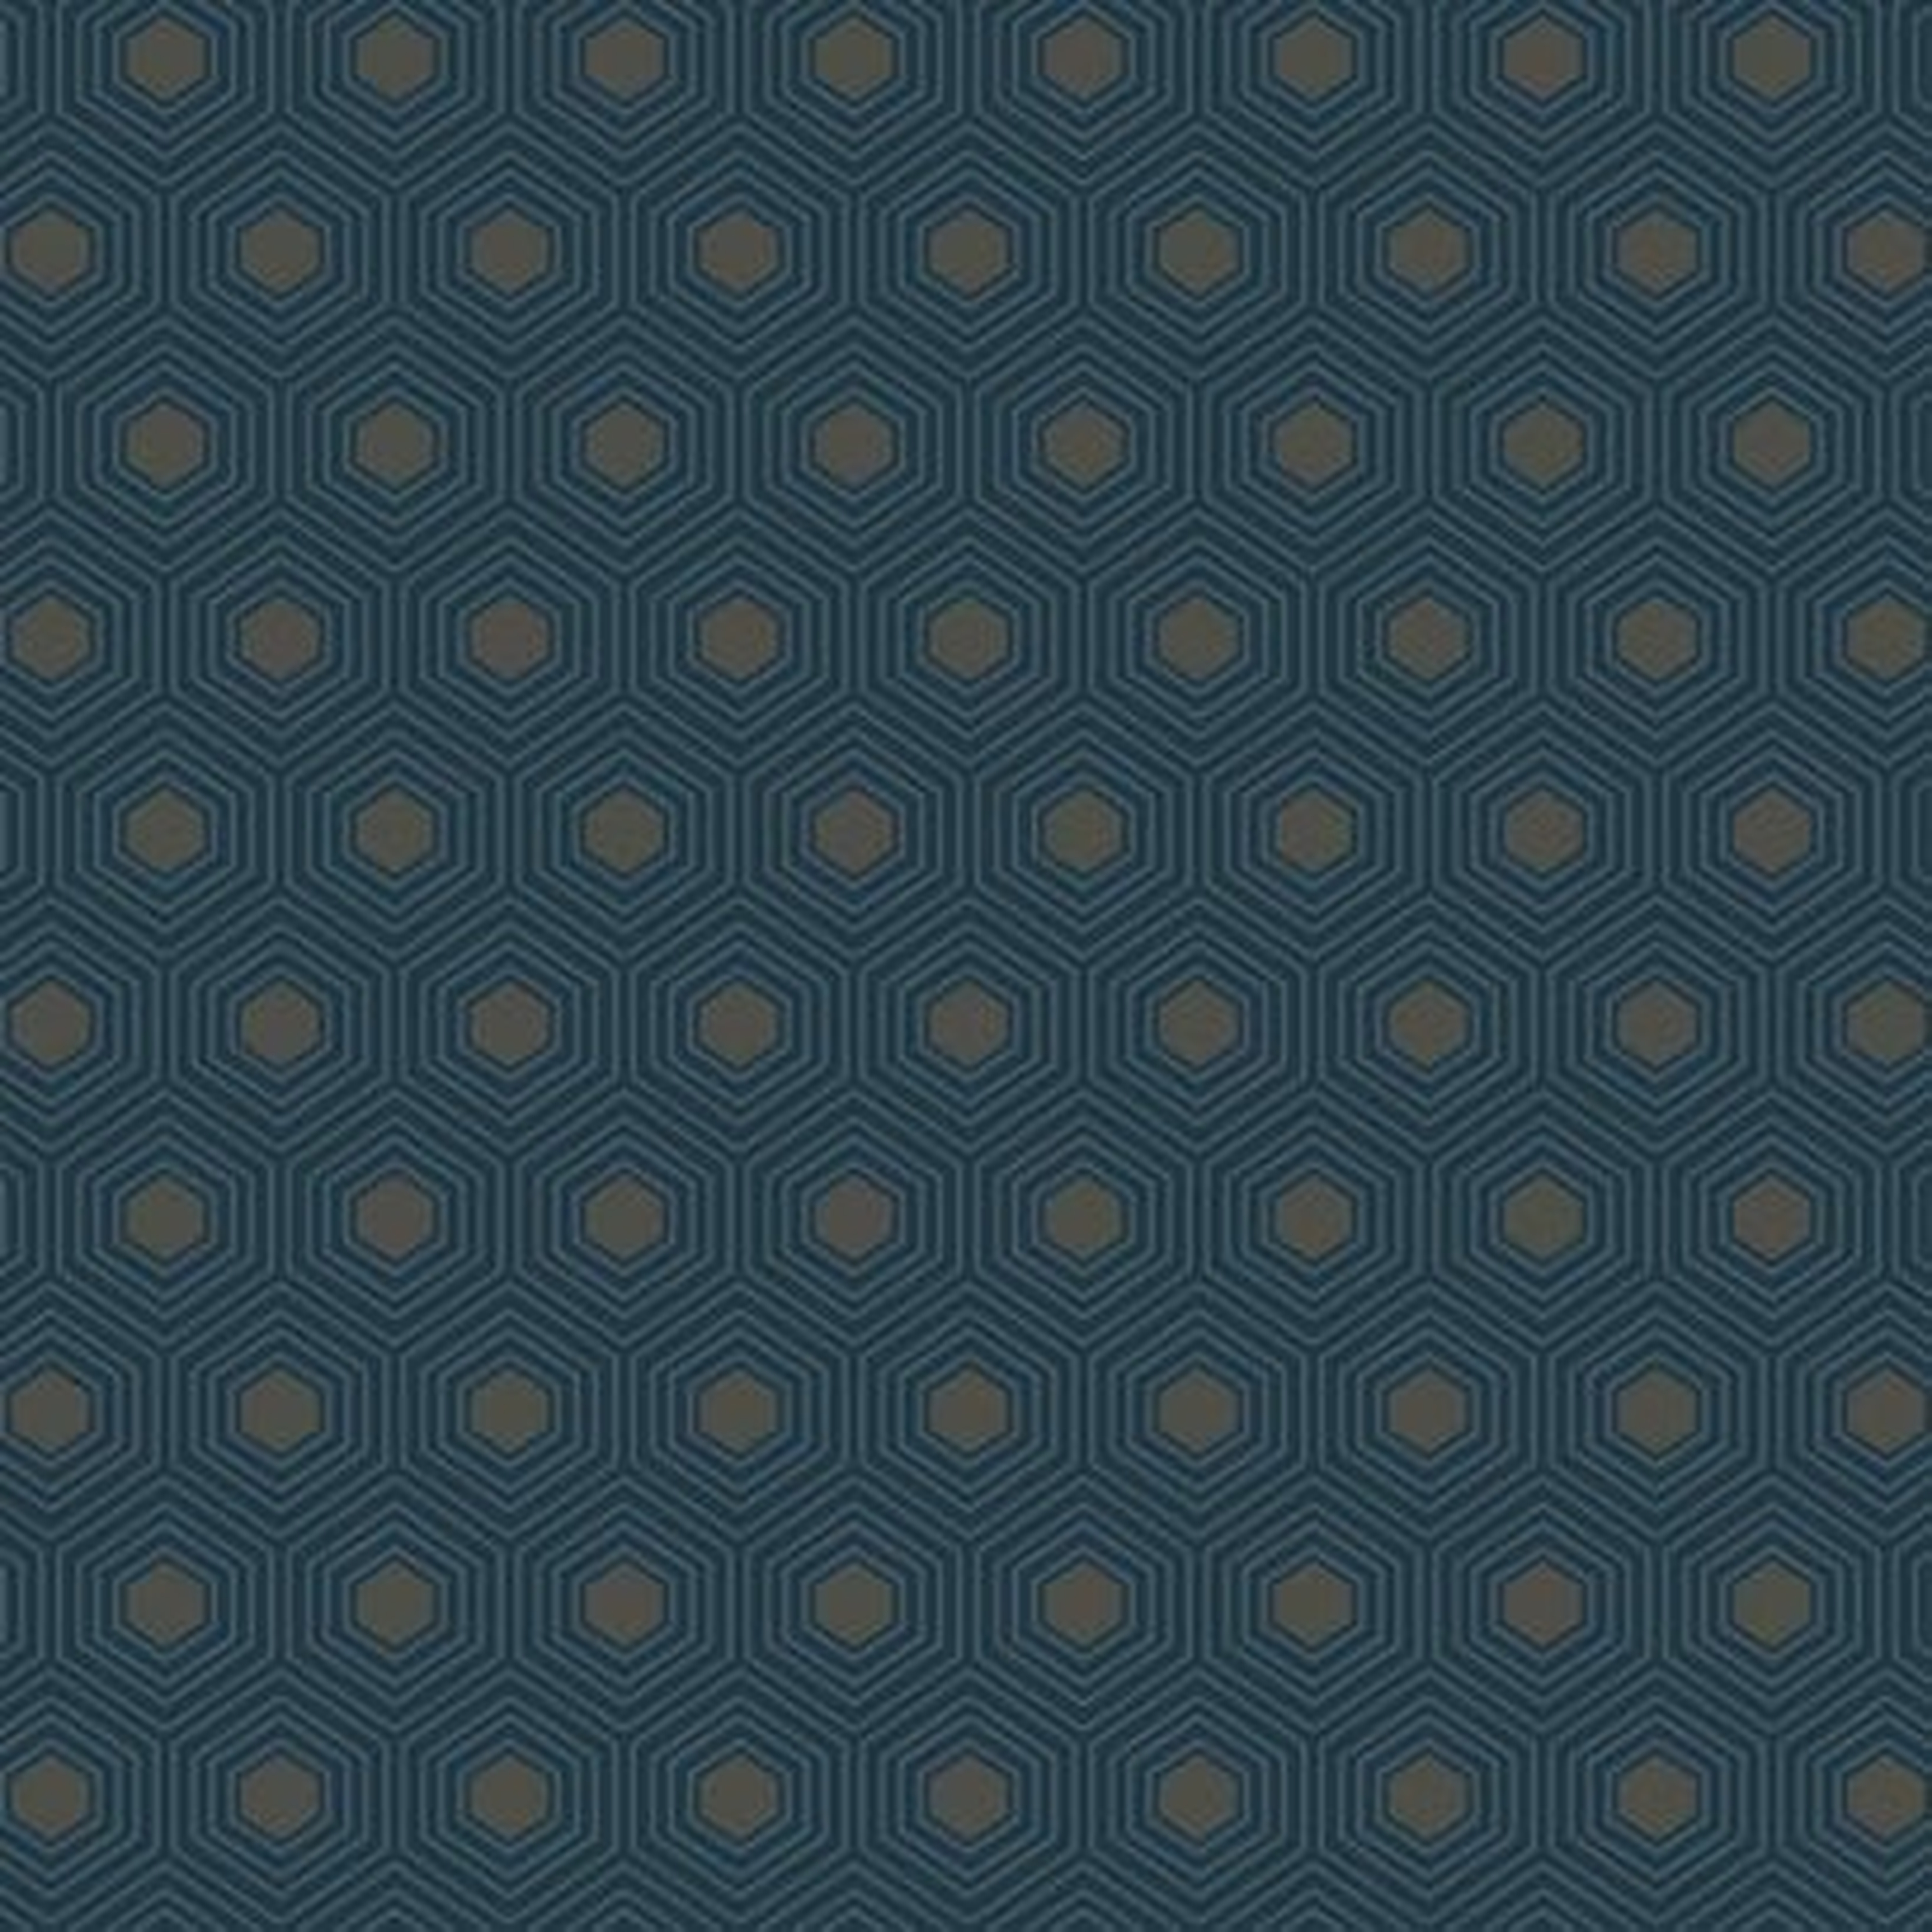 GE3640,Honeycomb, double roll - York Wallcoverings